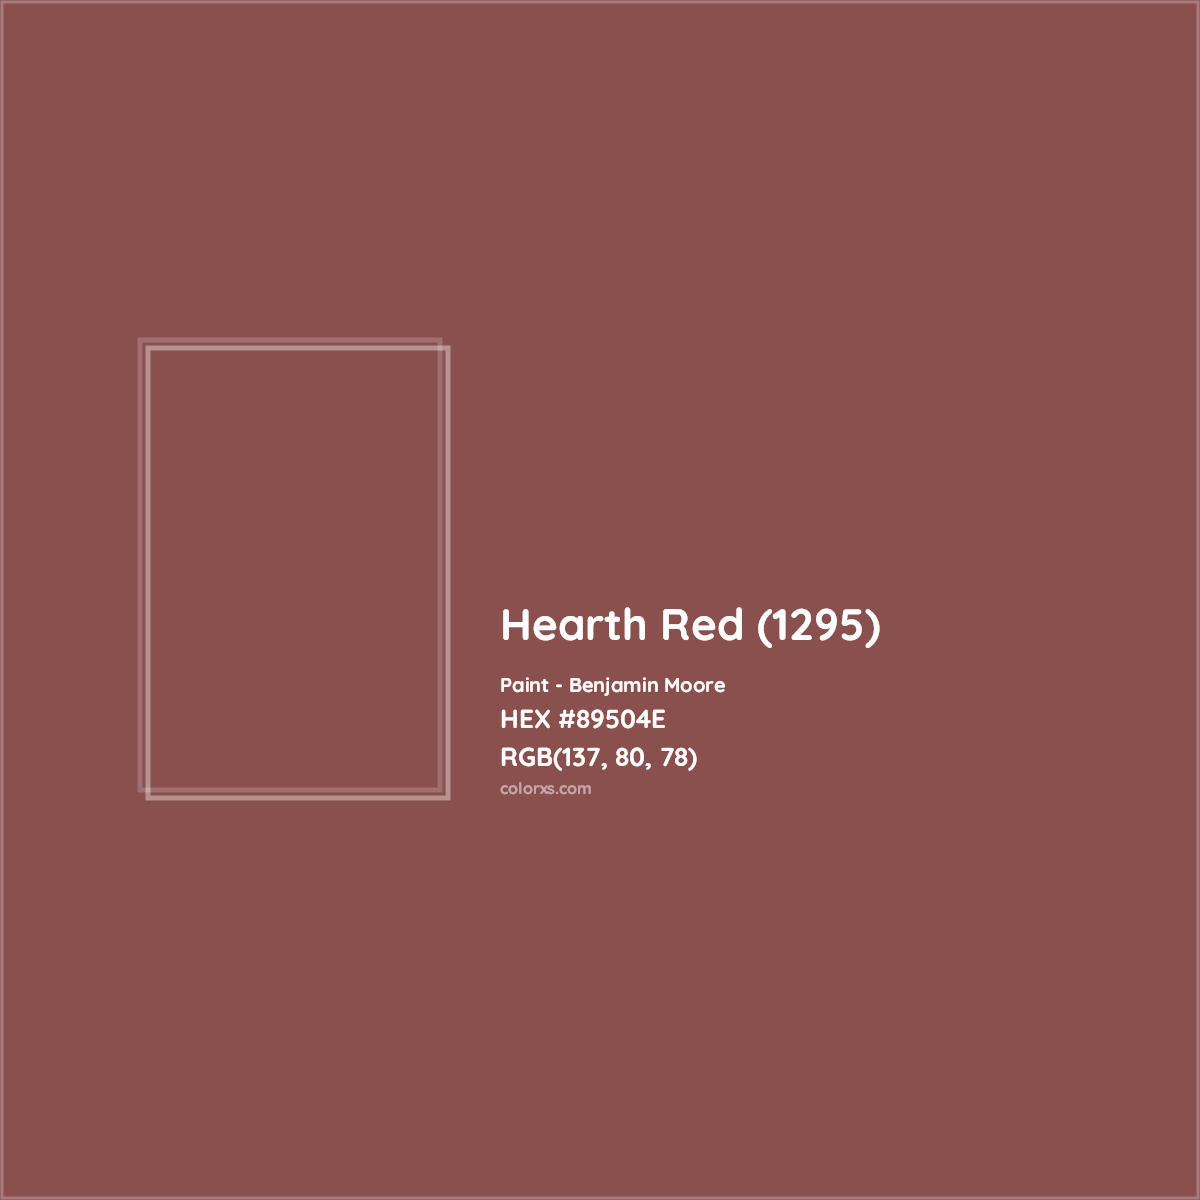 HEX #89504E Hearth Red (1295) Paint Benjamin Moore - Color Code